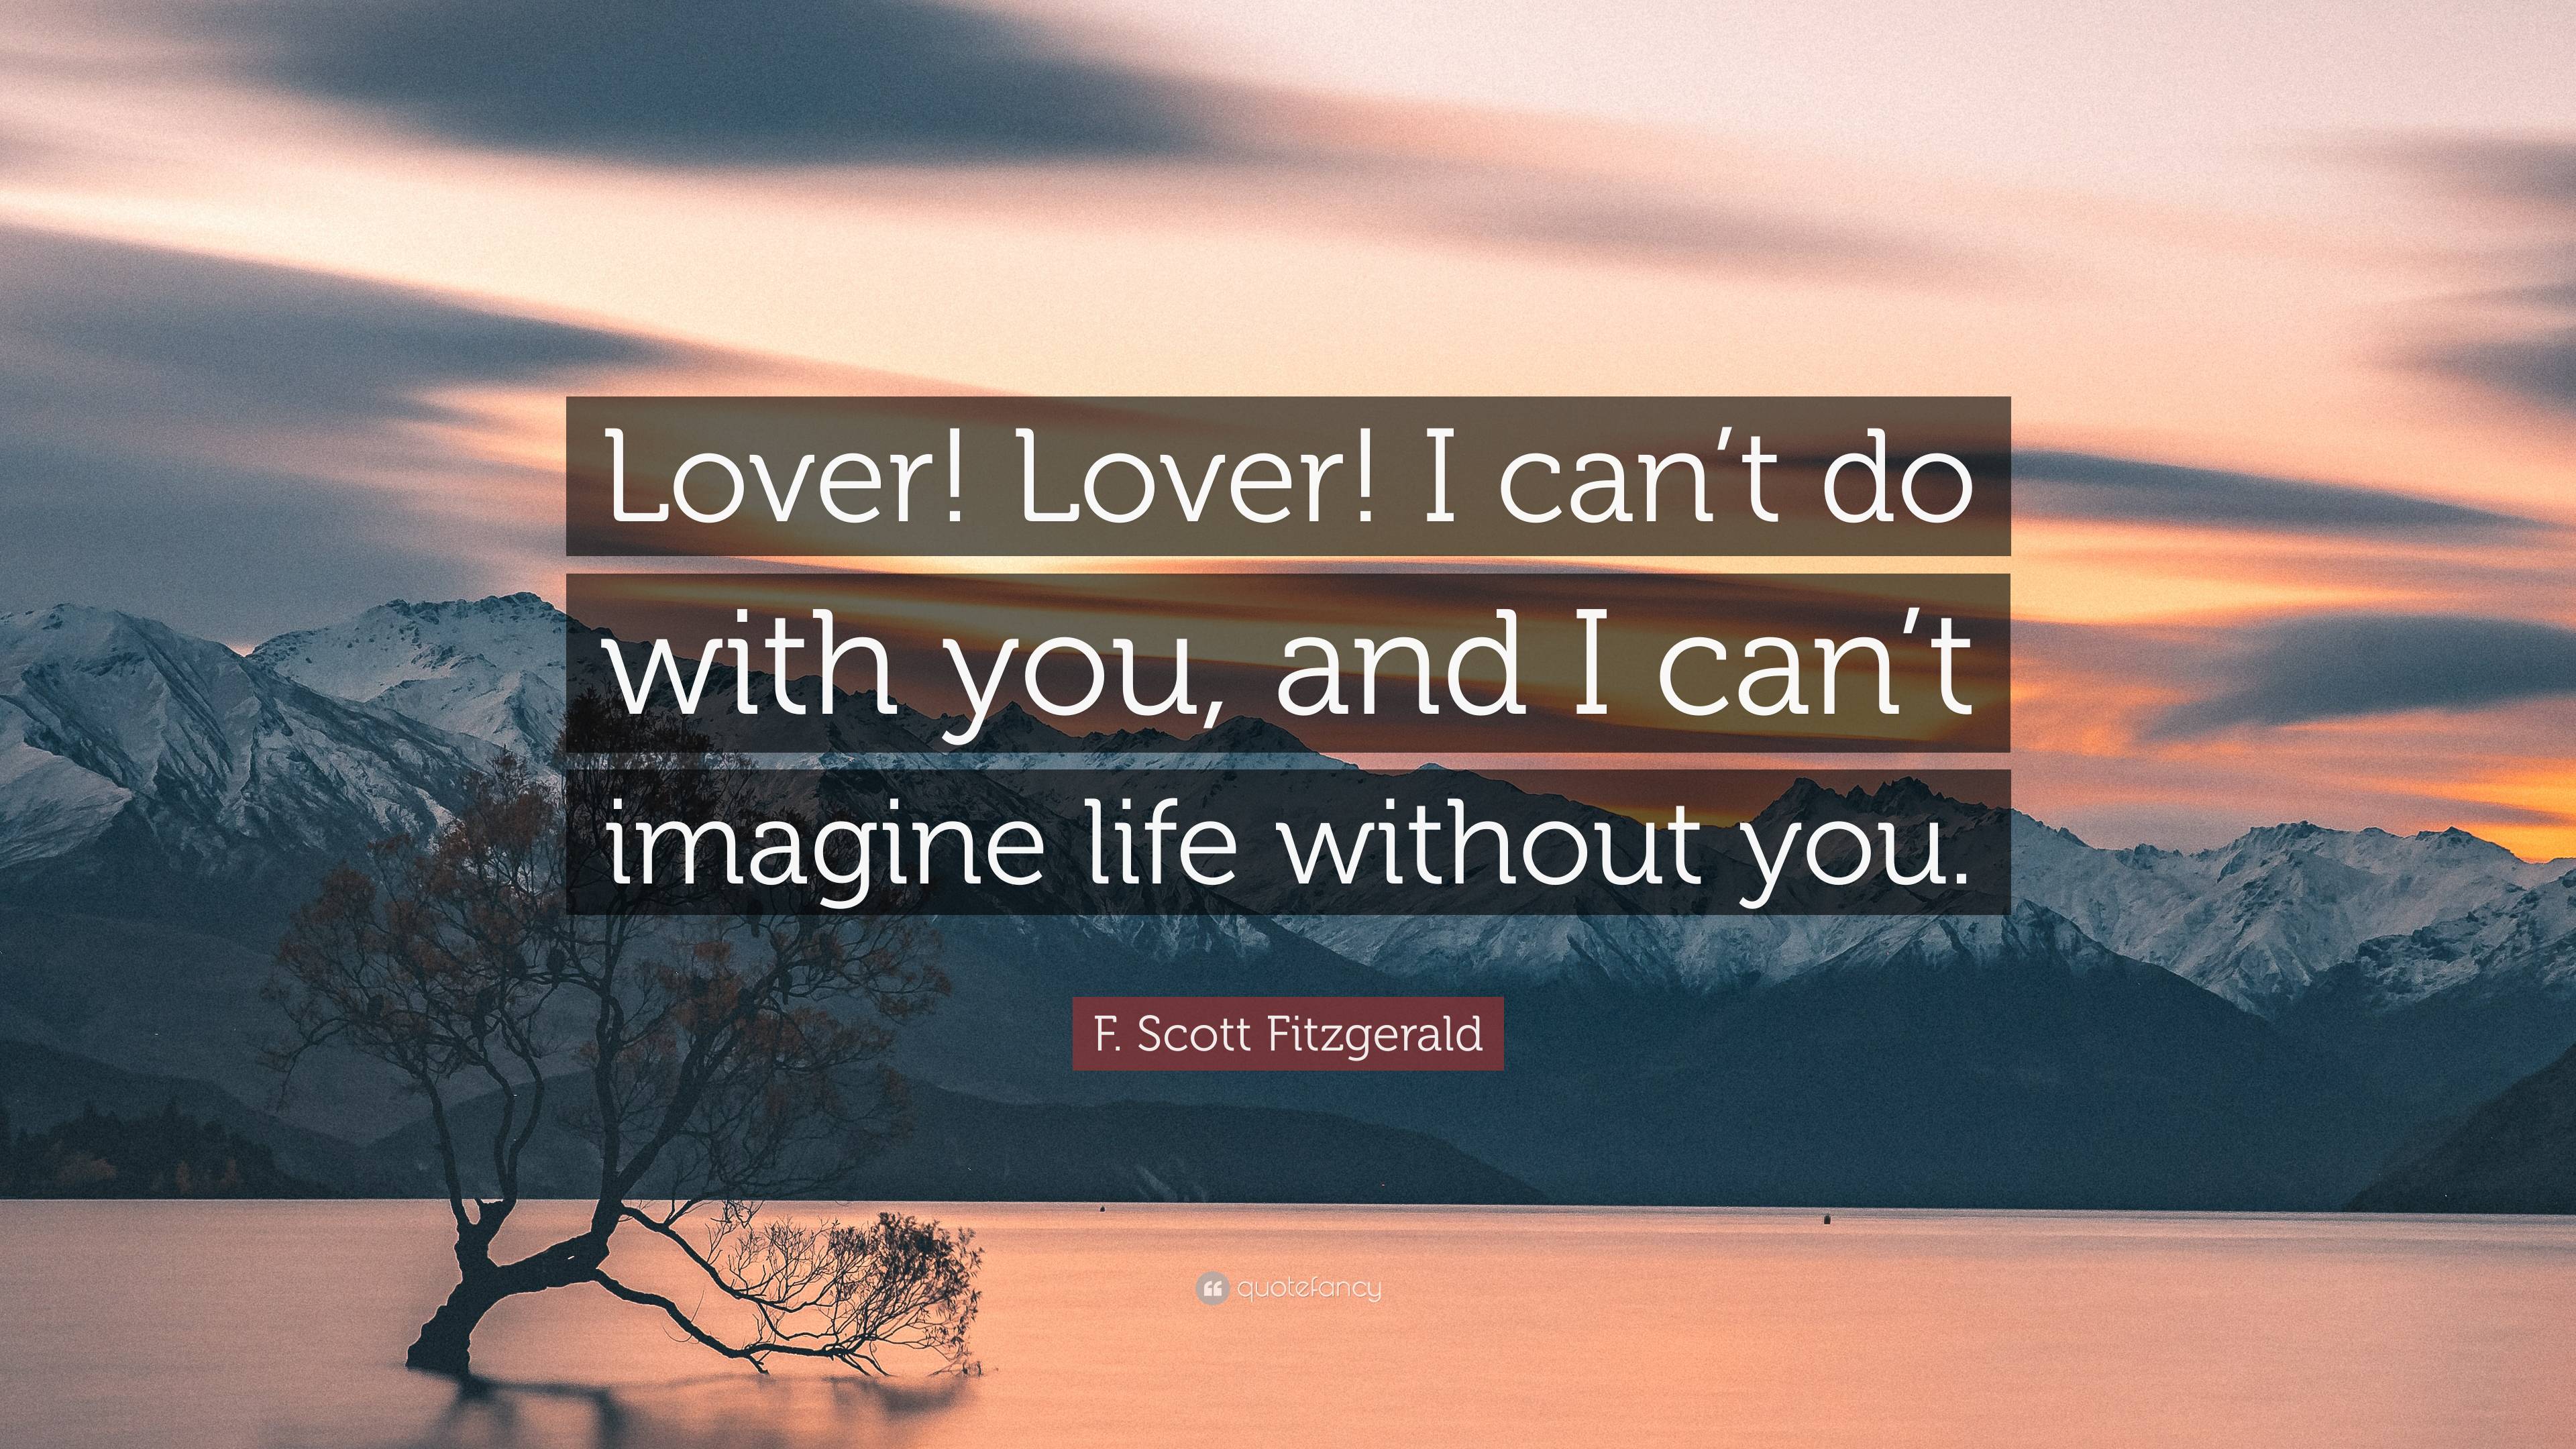 F. Scott Fitzgerald Quote: “Lover! Lover! I can’t do with you, and I ...